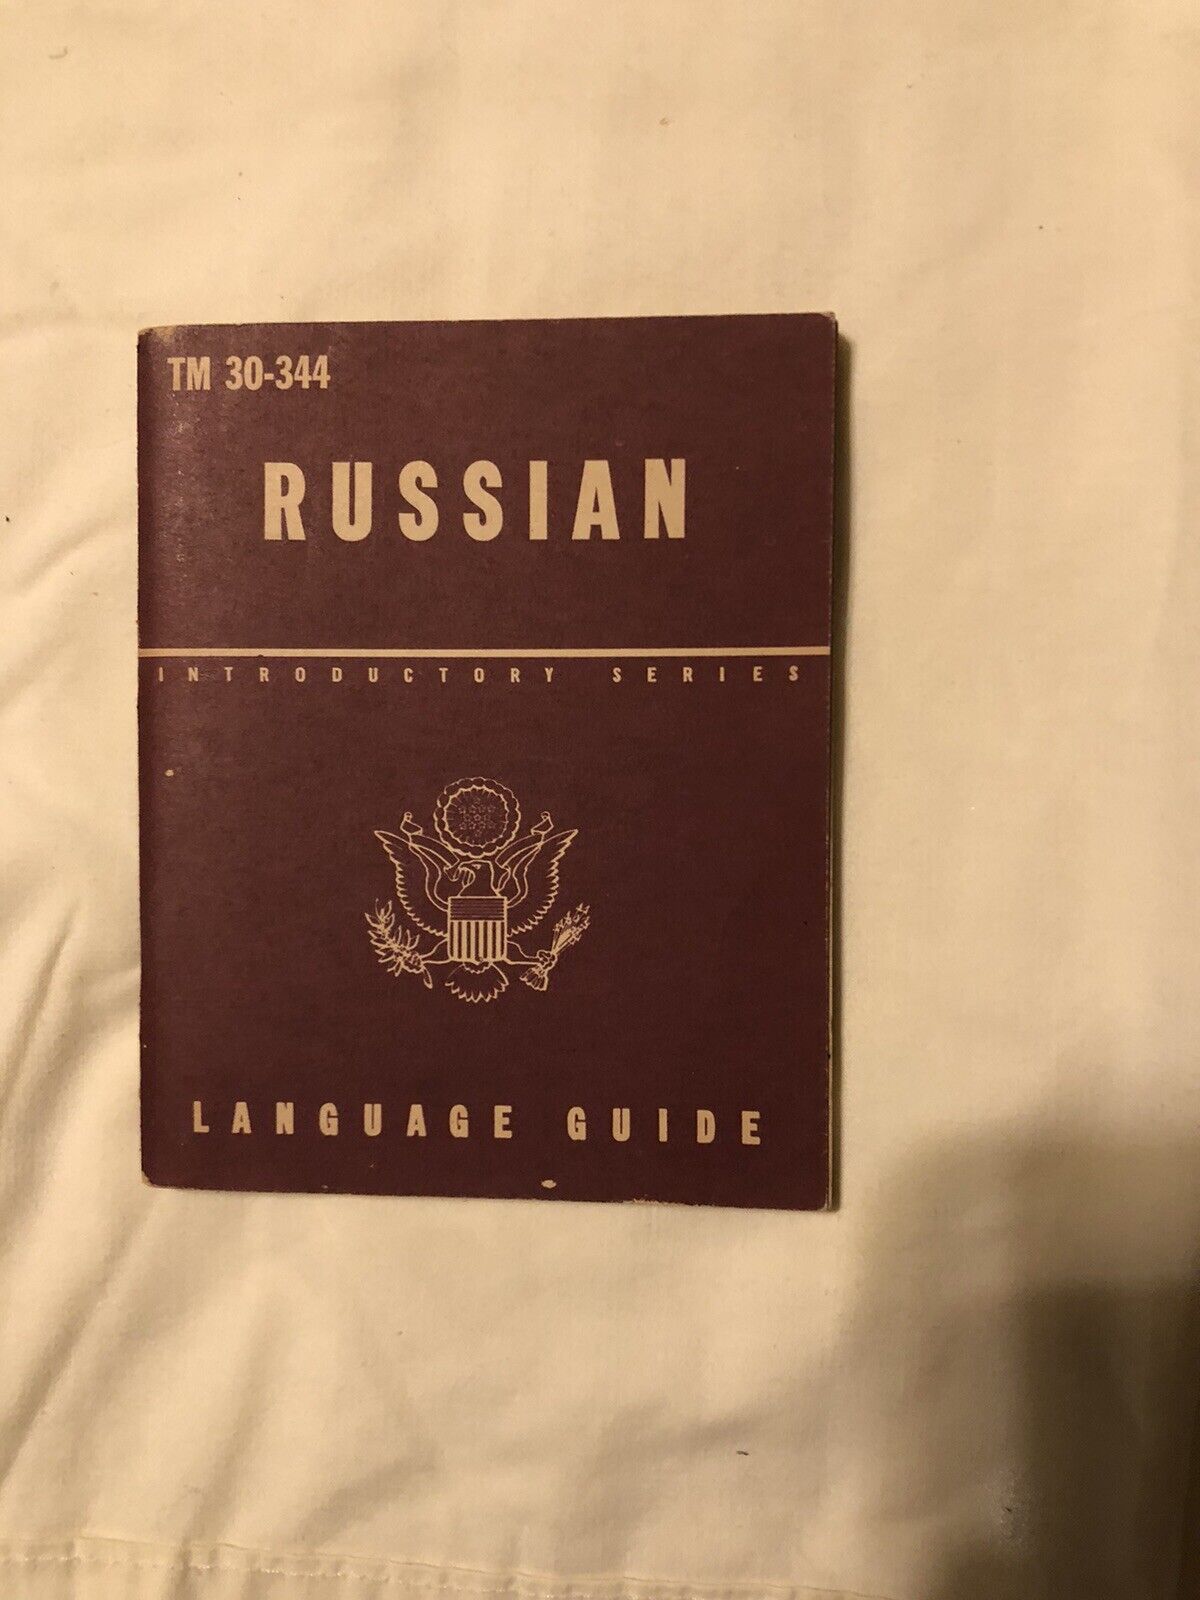 World War 2 Russian Language Guide Introductory Series 1943. TM 30-344